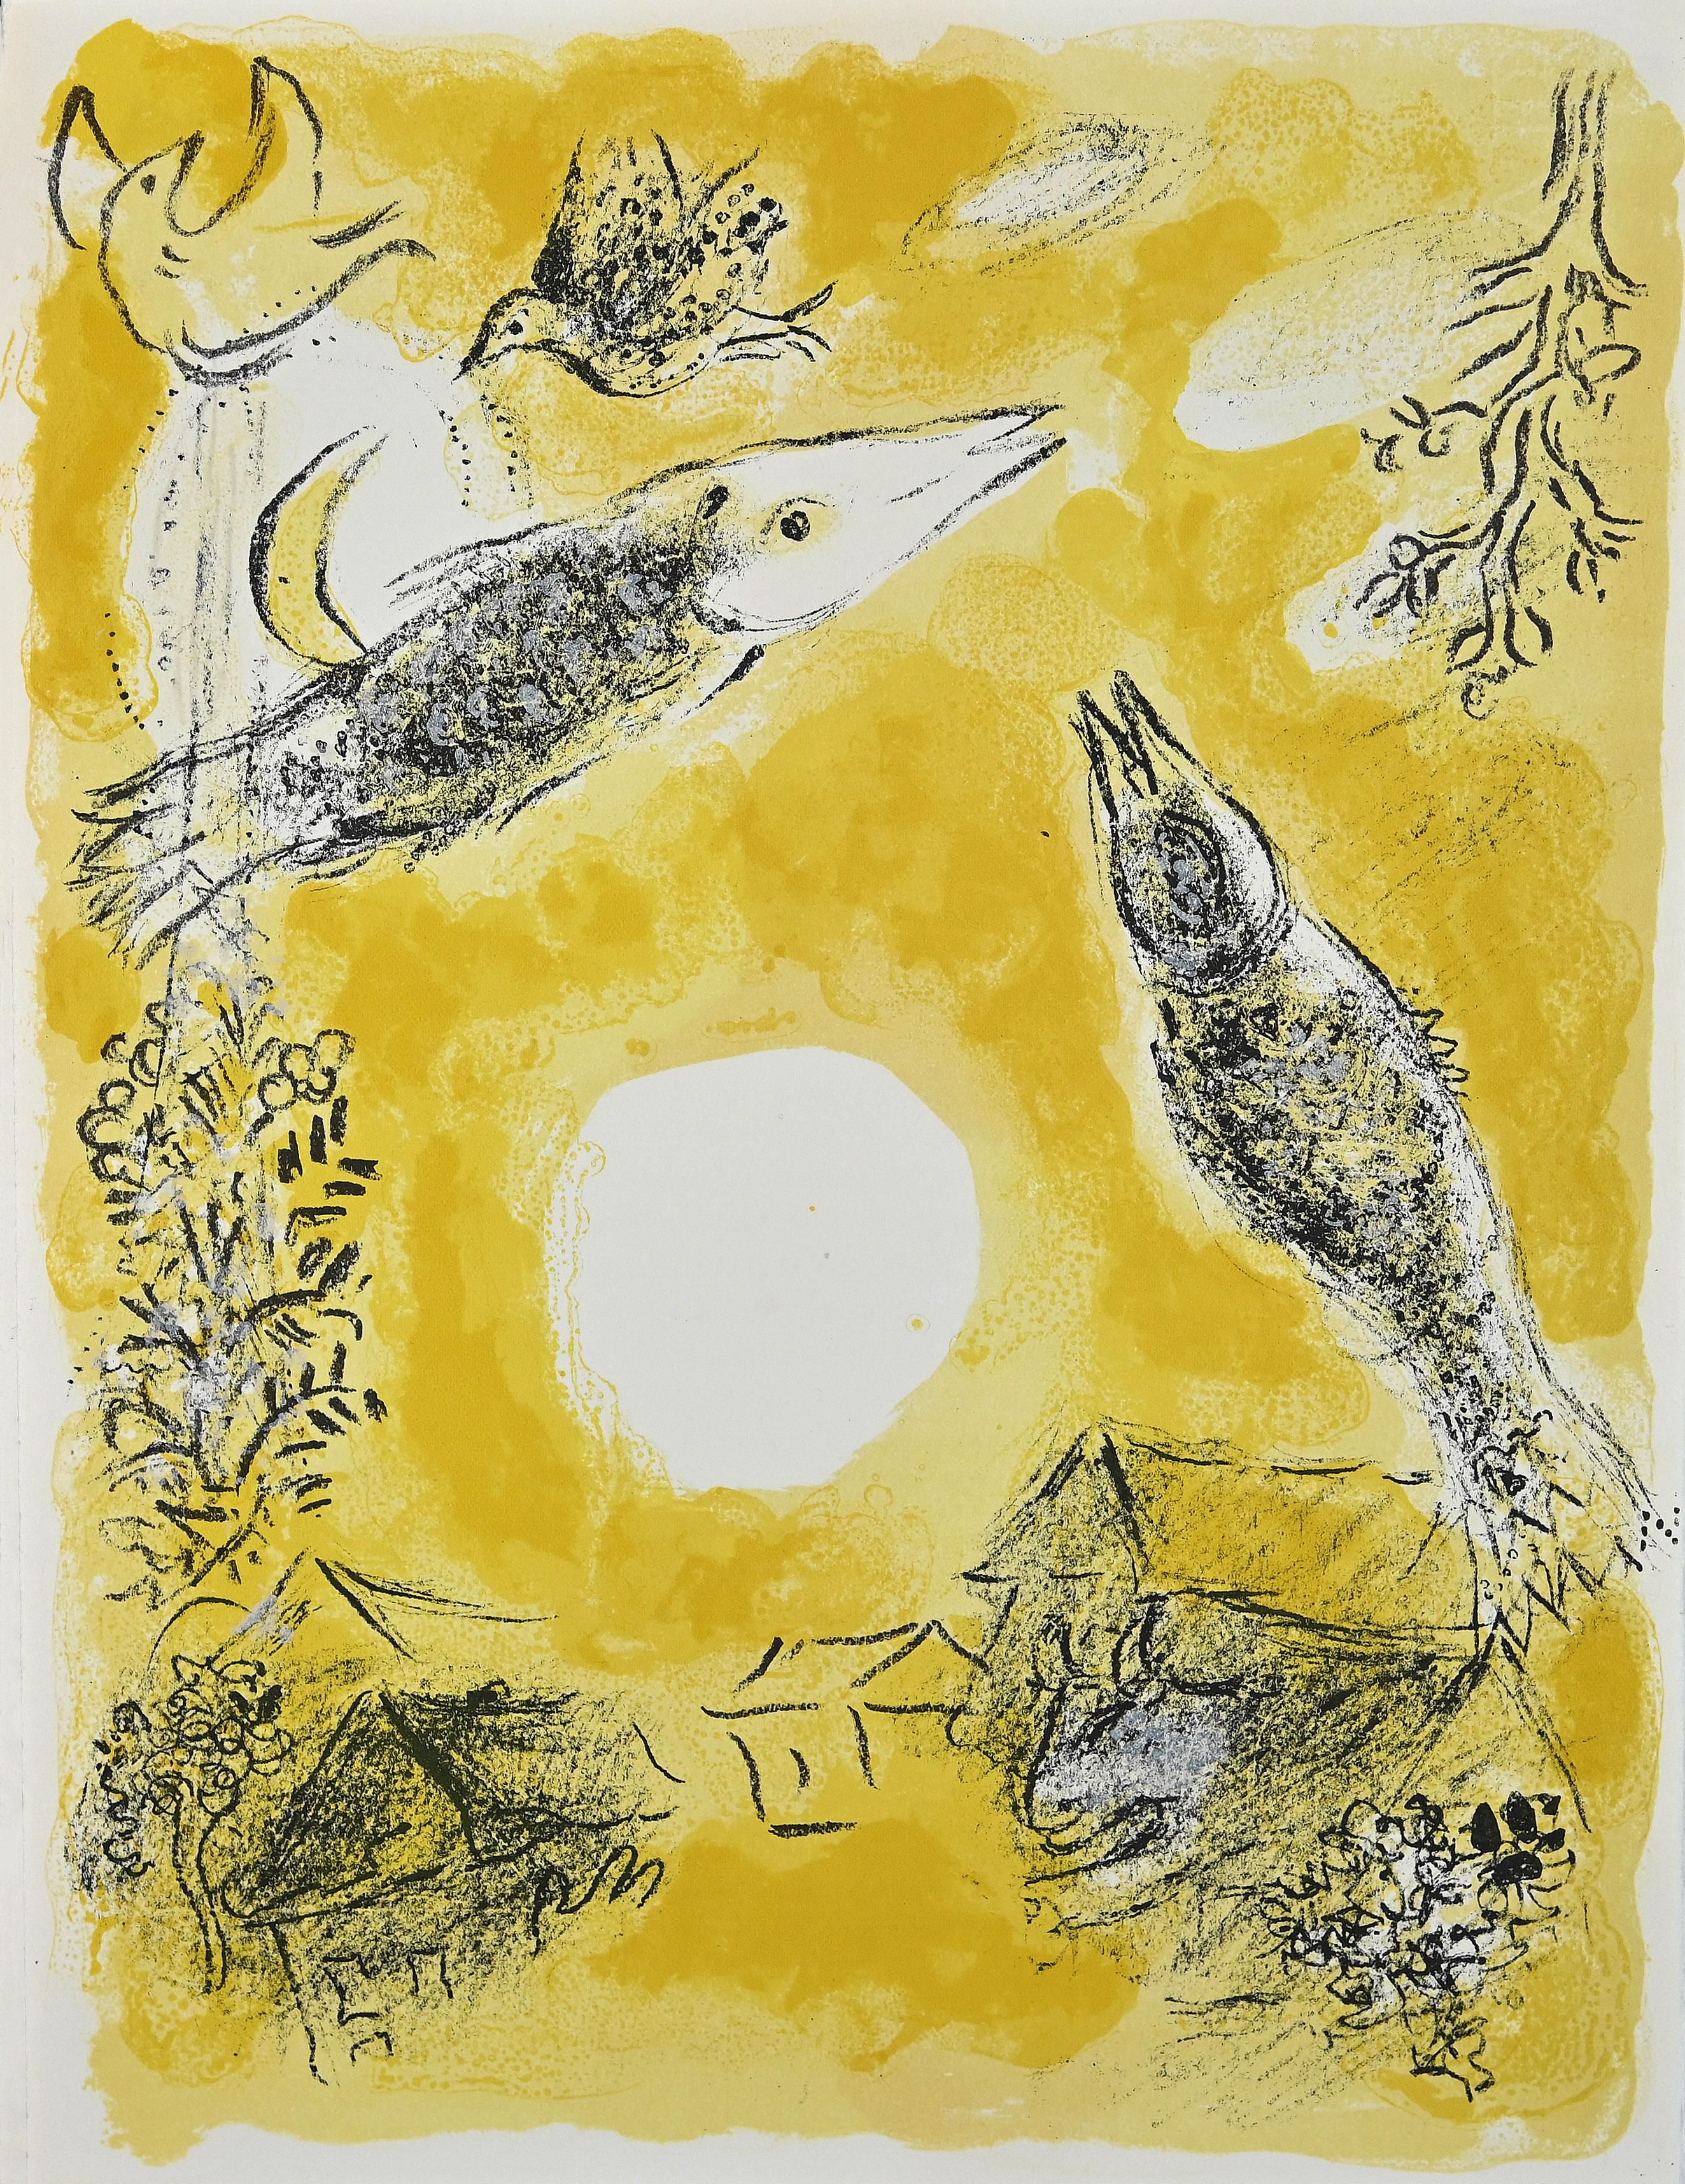 Marc Chagall Figurative Print - Vitraux pour Jérusalem - Illustrated Book by M. Chagall, 1962